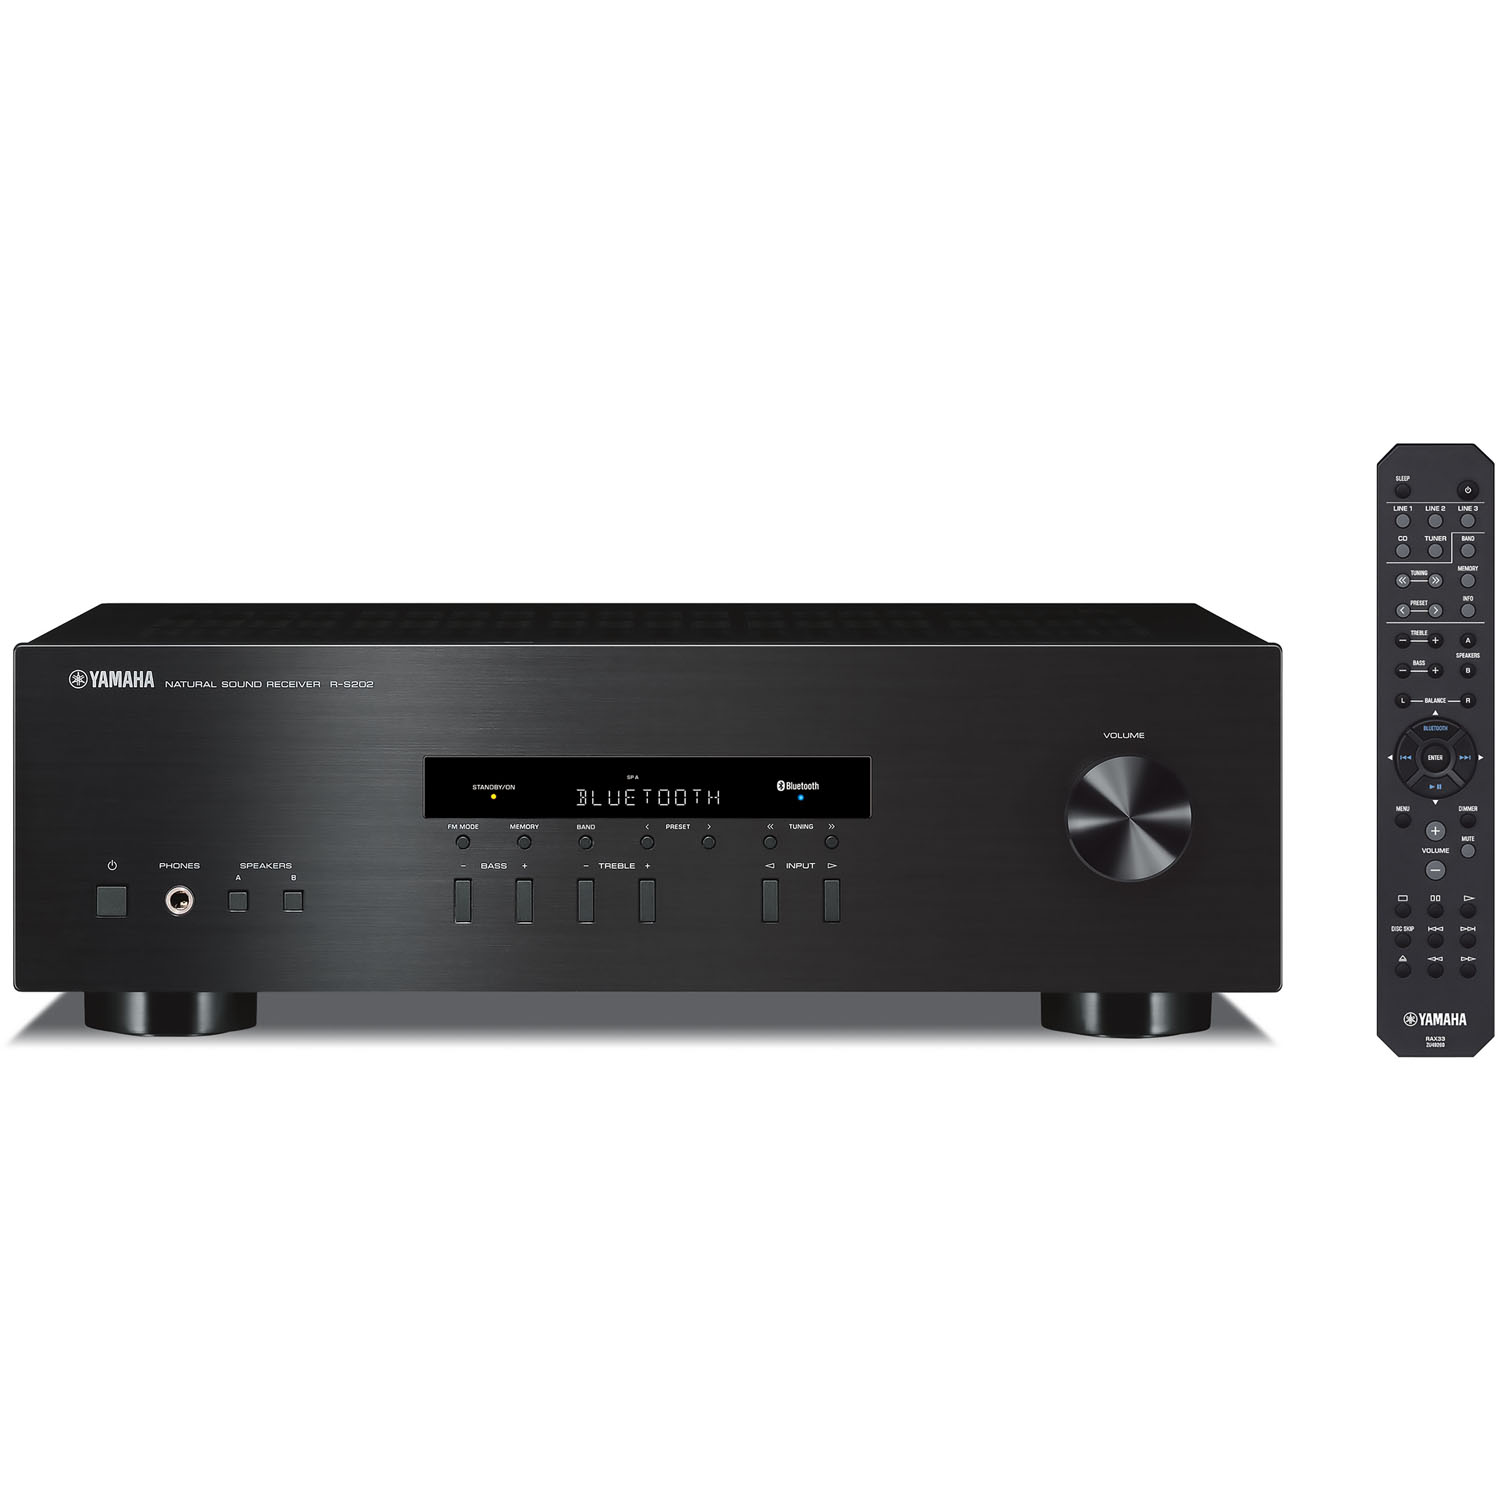 Yamaha Natural Sound Stereo Receiver, Black - image 1 of 3